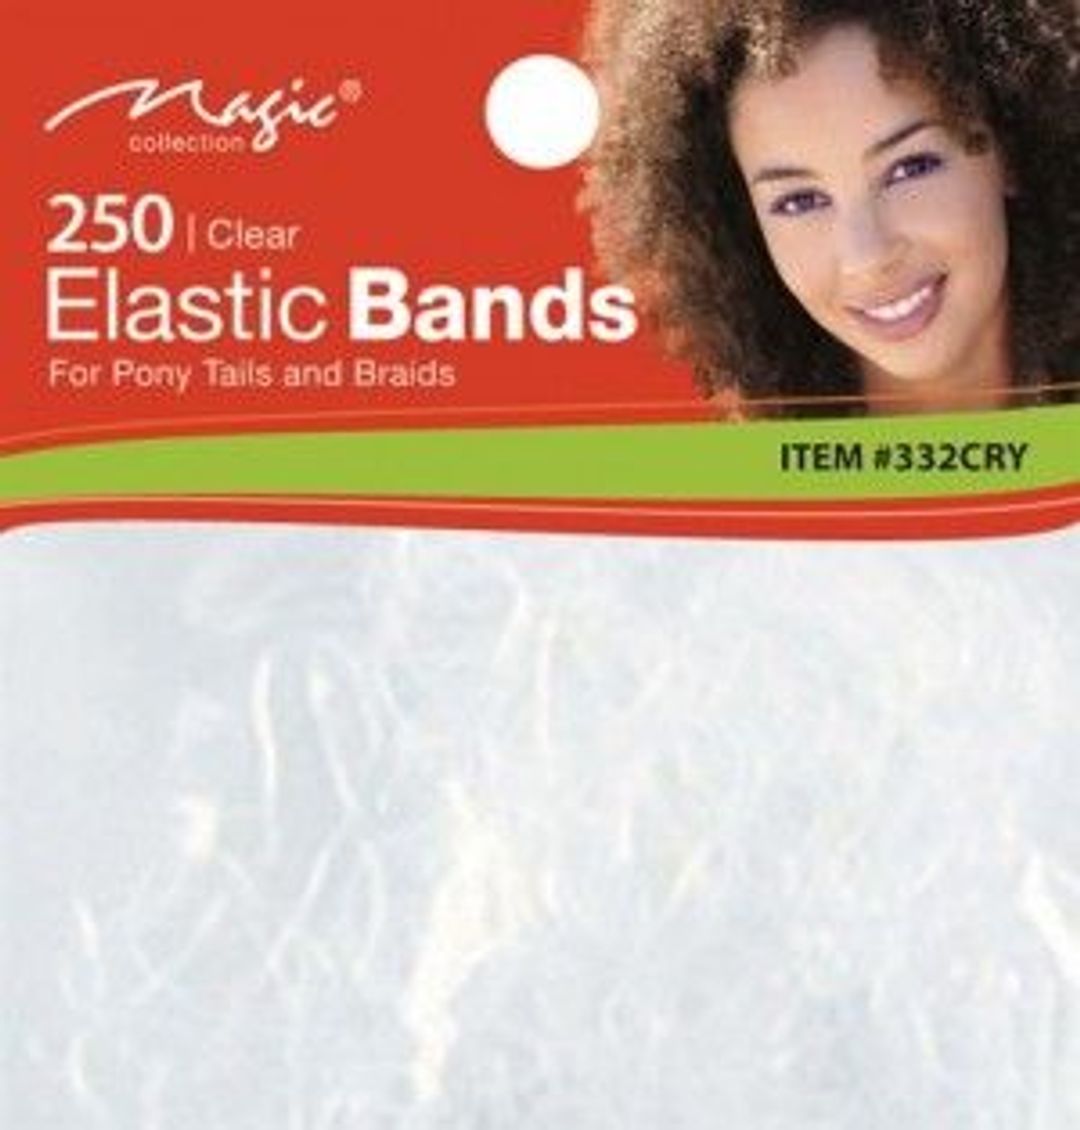 Magic Collection 250 Elastic Bands Crystal - 332